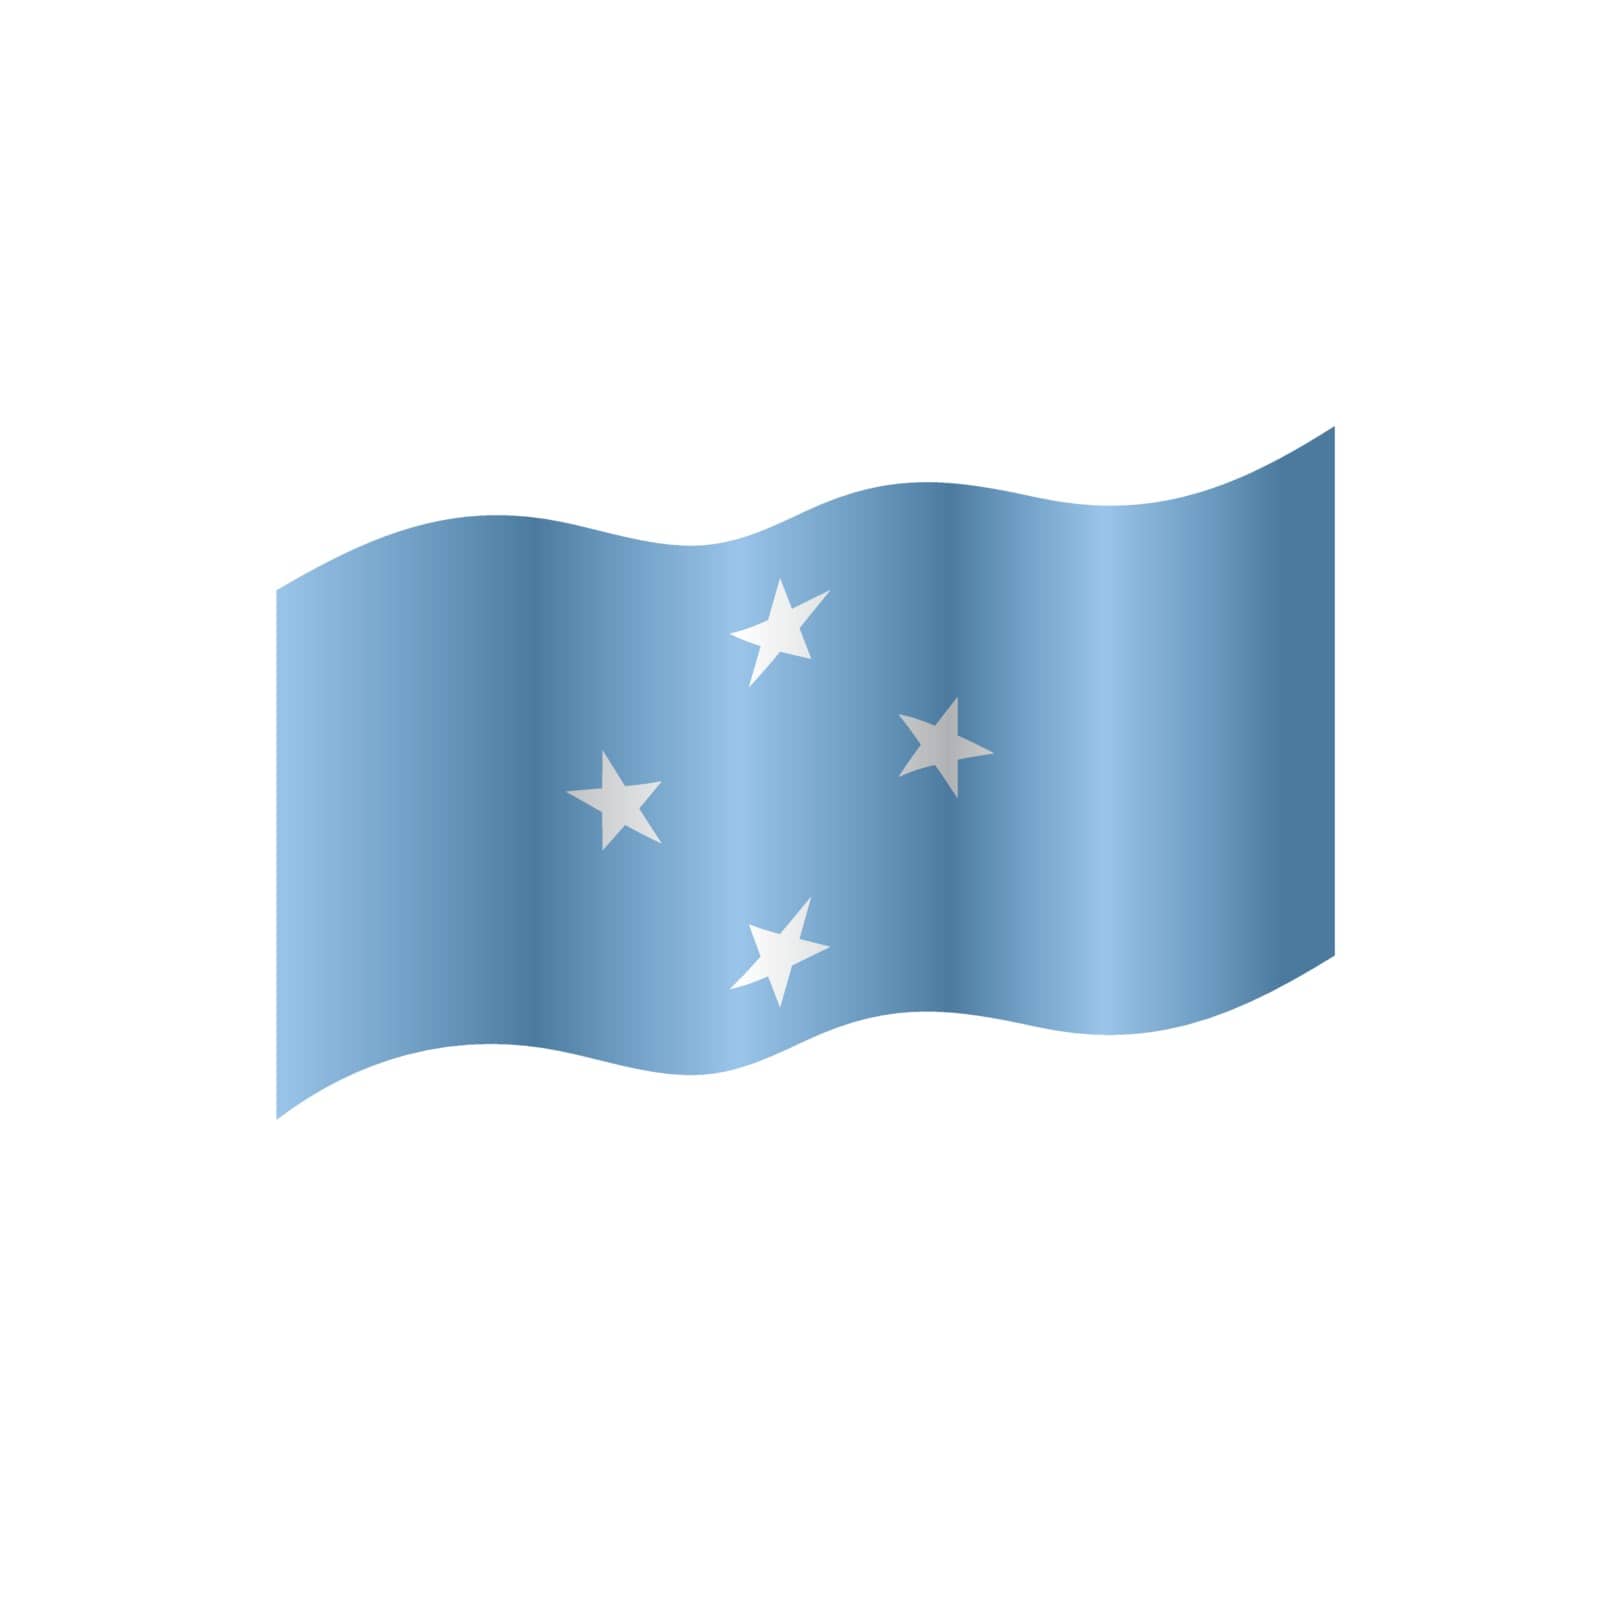 Federated States Micronesia flag by butenkow